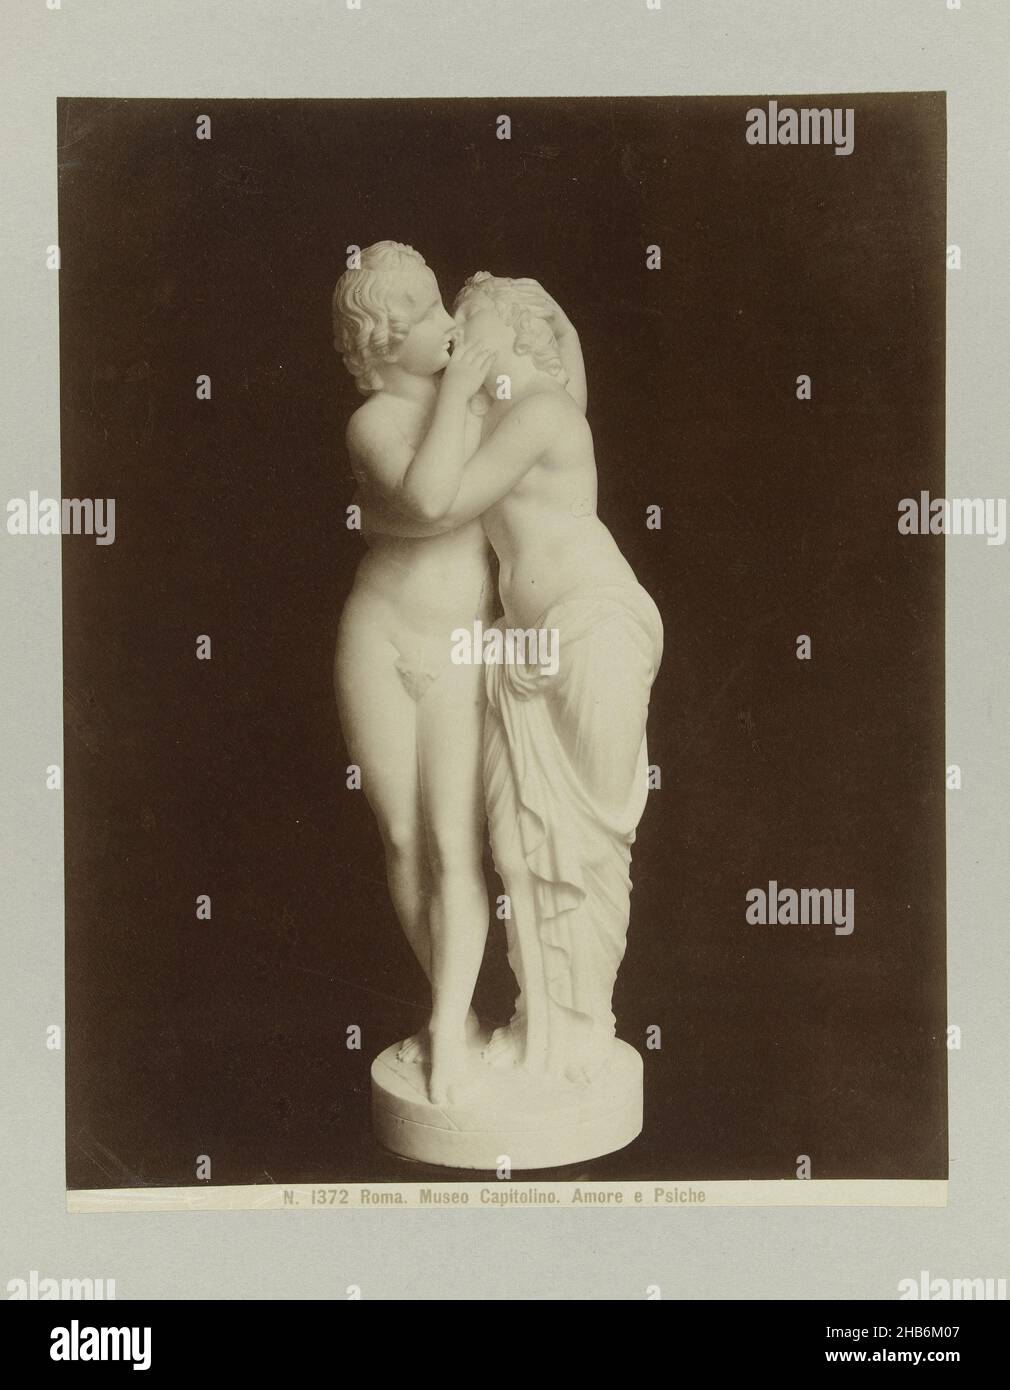 Sculpture of Amor and Psyche, N. 1372 Roma. Museo Capitolino. Amore e Psiche (title on object), anonymous, Rome, c. 1880 - c. 1904, paper, albumen print, height 250 mm × width 198 mmheight 327 mm × width 241 mm Stock Photo